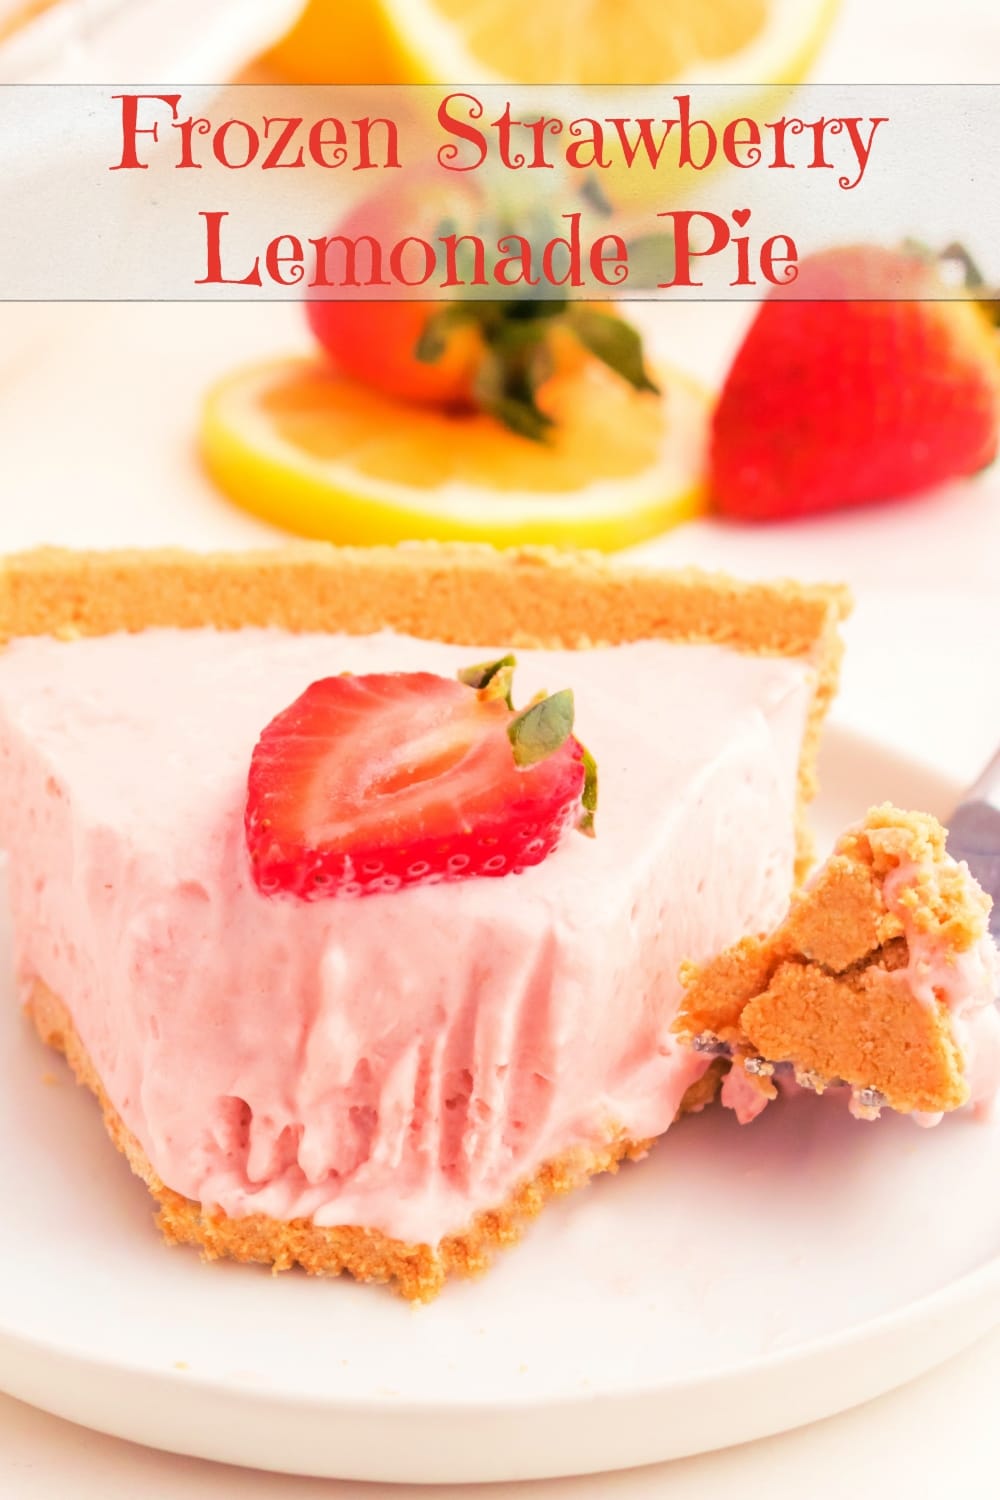 This wildly uncomplicated, Frozen Strawberry Lemonade Pie, is hard to resist. From the lightly sweet and airy filling to the crisp graham cracker crust, this pie is ready to be served at every gathering this season.This wildly uncomplicated, Frozen Strawberry Lemonade Pie, is hard to resist. From the lightly sweet and airy filling to the crisp graham cracker crust, this pie is ready to be served at every gathering this season. via @cmpollak1